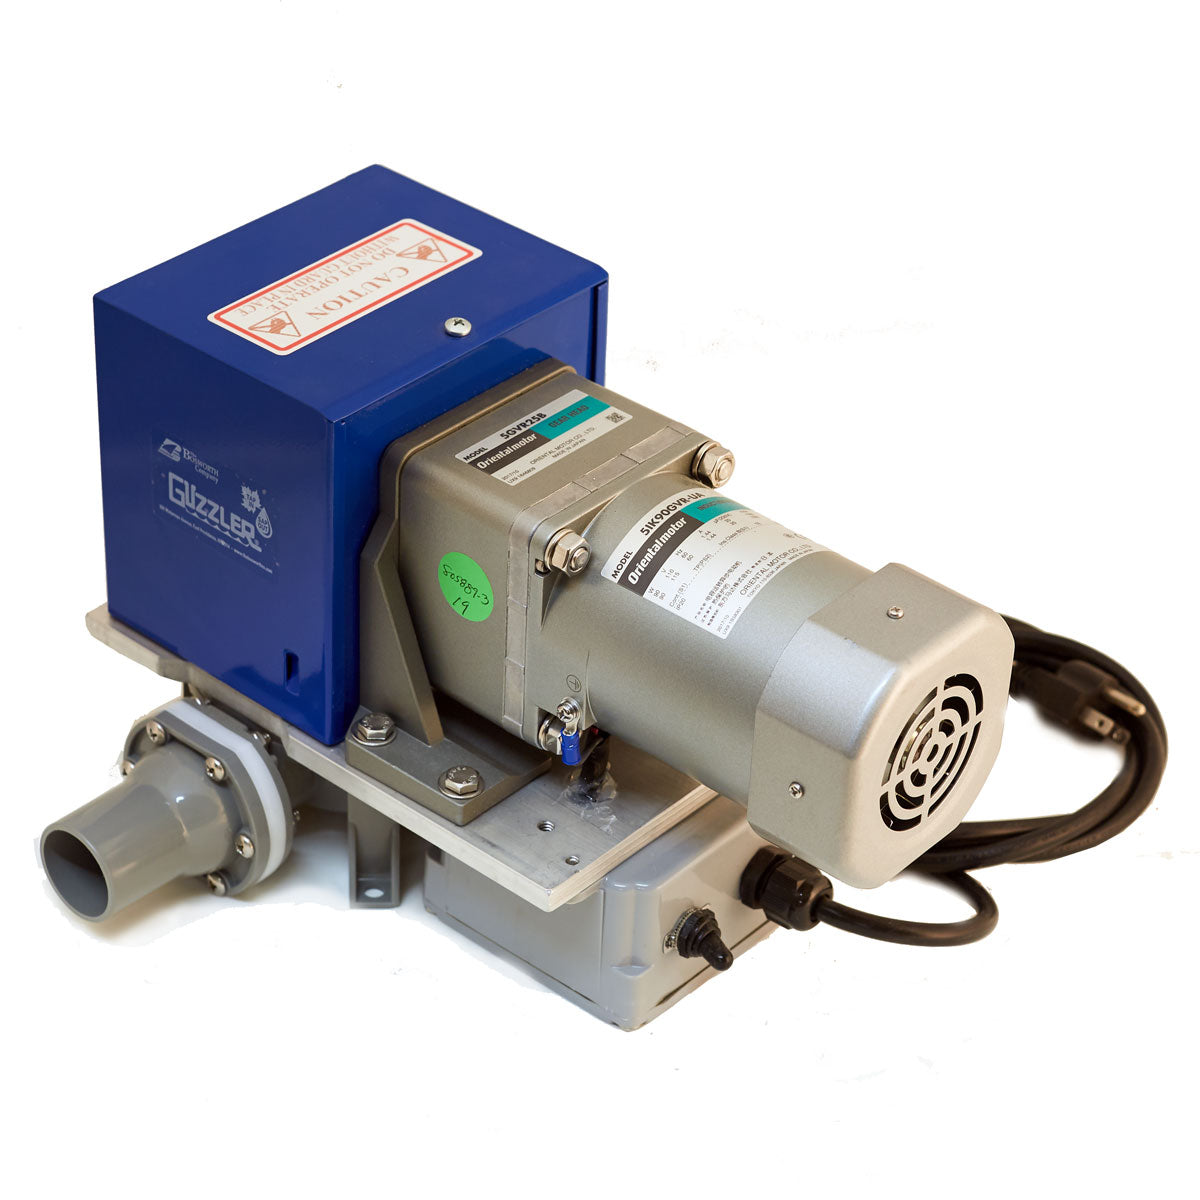 Diaphragm Vacuum Pump w/Electric Motor and One Diaphragm (for 200-300 taps)